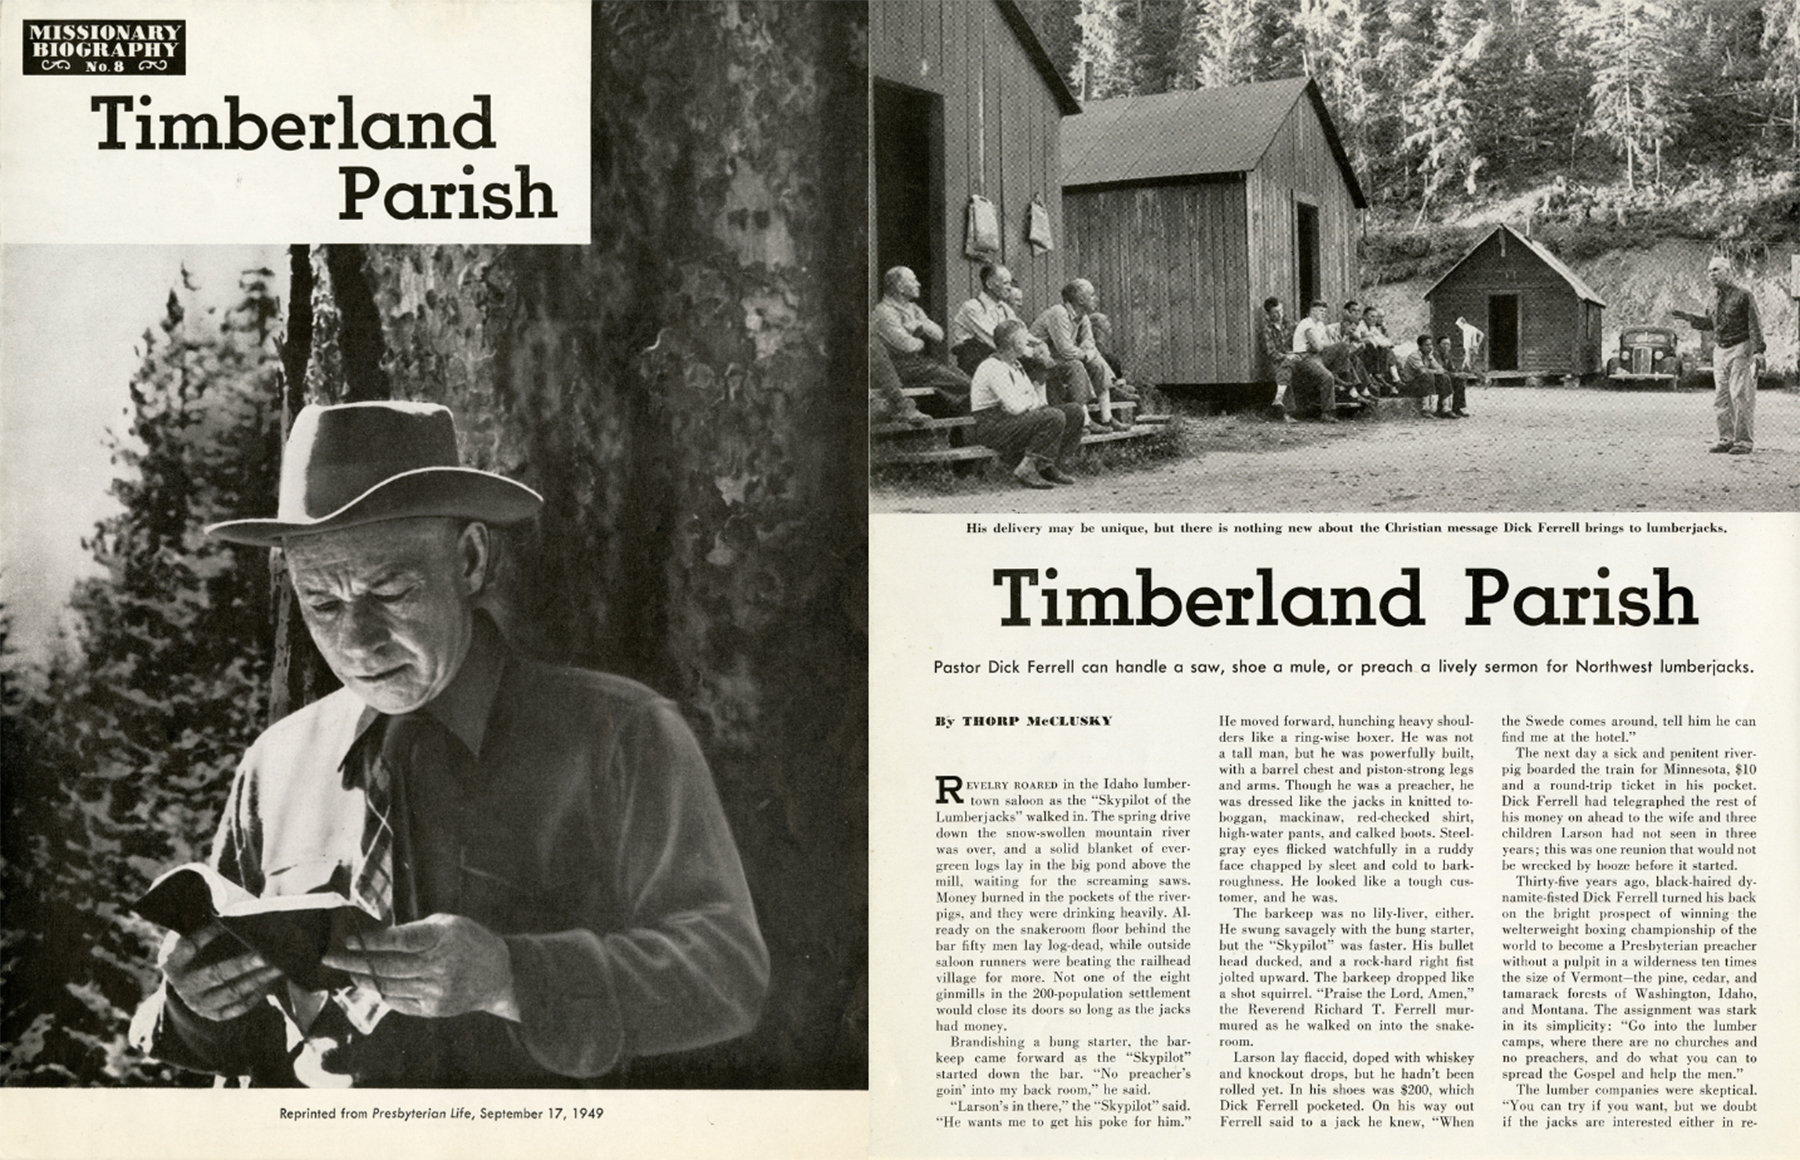 Cover of missionary biography no. 8, reprinted from “Presbyterian Life,” September 17, 1949. (Left) Pearl: 8459 (Right) Pearl: 8376